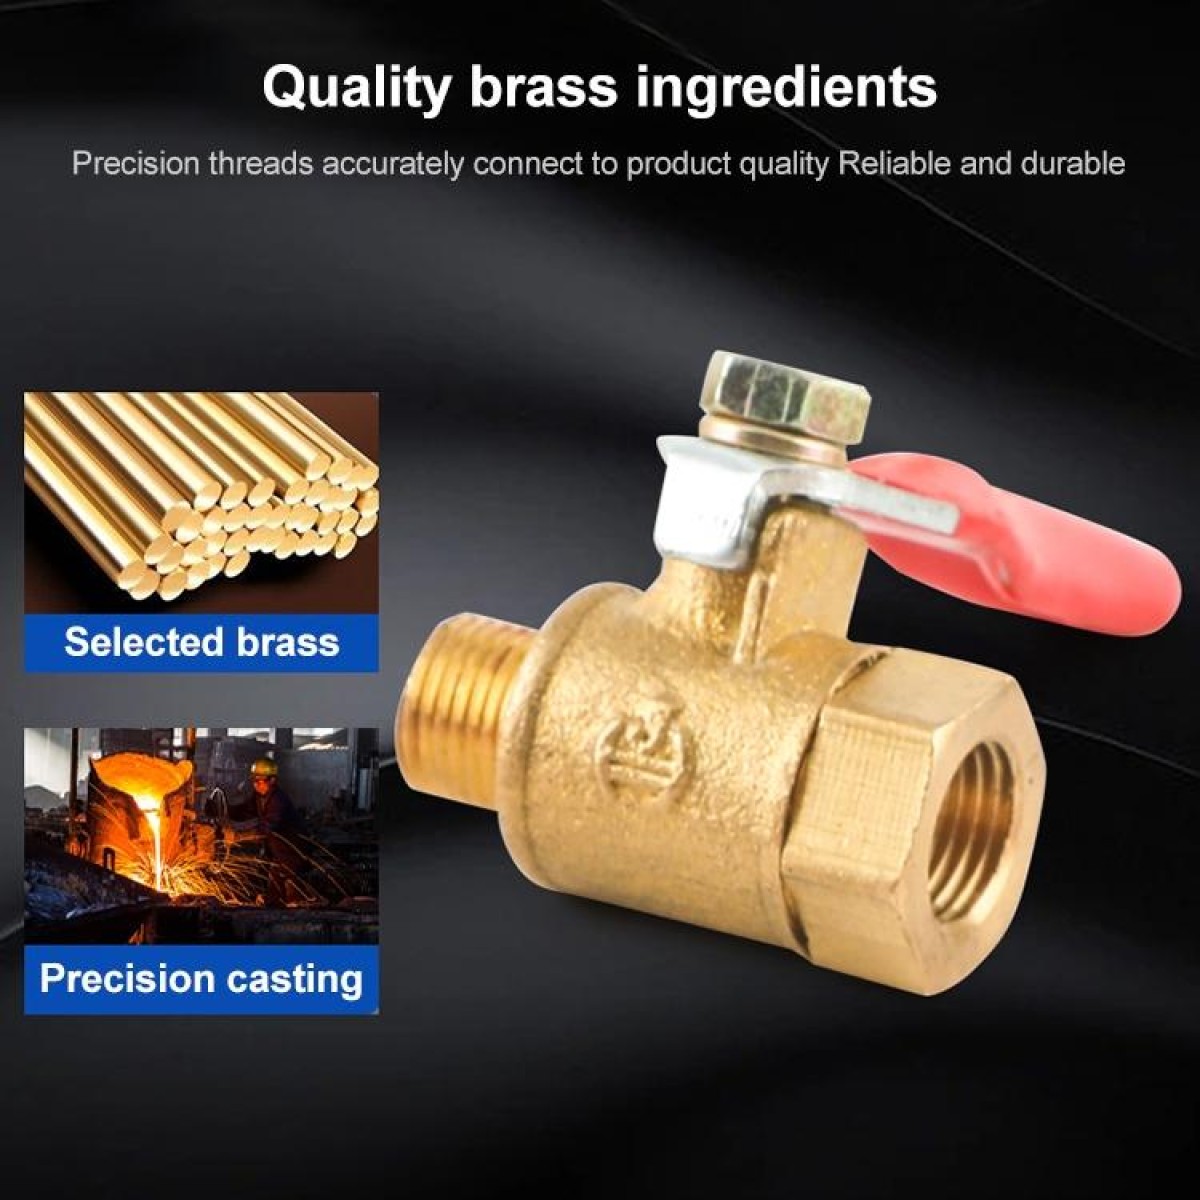 LAIZE Pneumatic Hose Connector Copper Ball Valve, Specification:Double Outside 4 1/2 inch